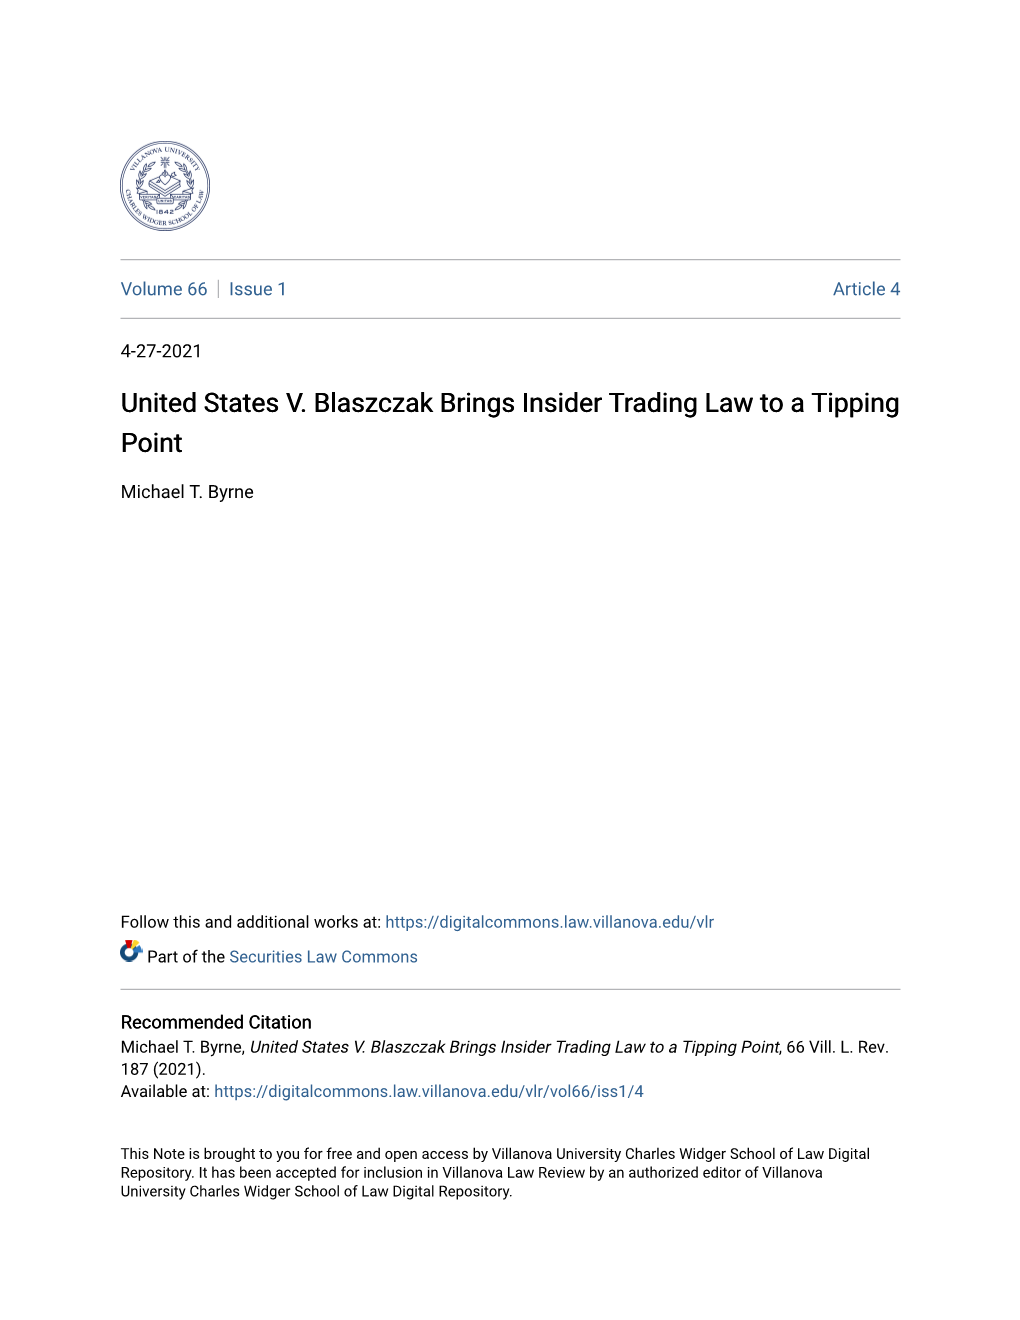 United States V. Blaszczak Brings Insider Trading Law to a Tipping Point